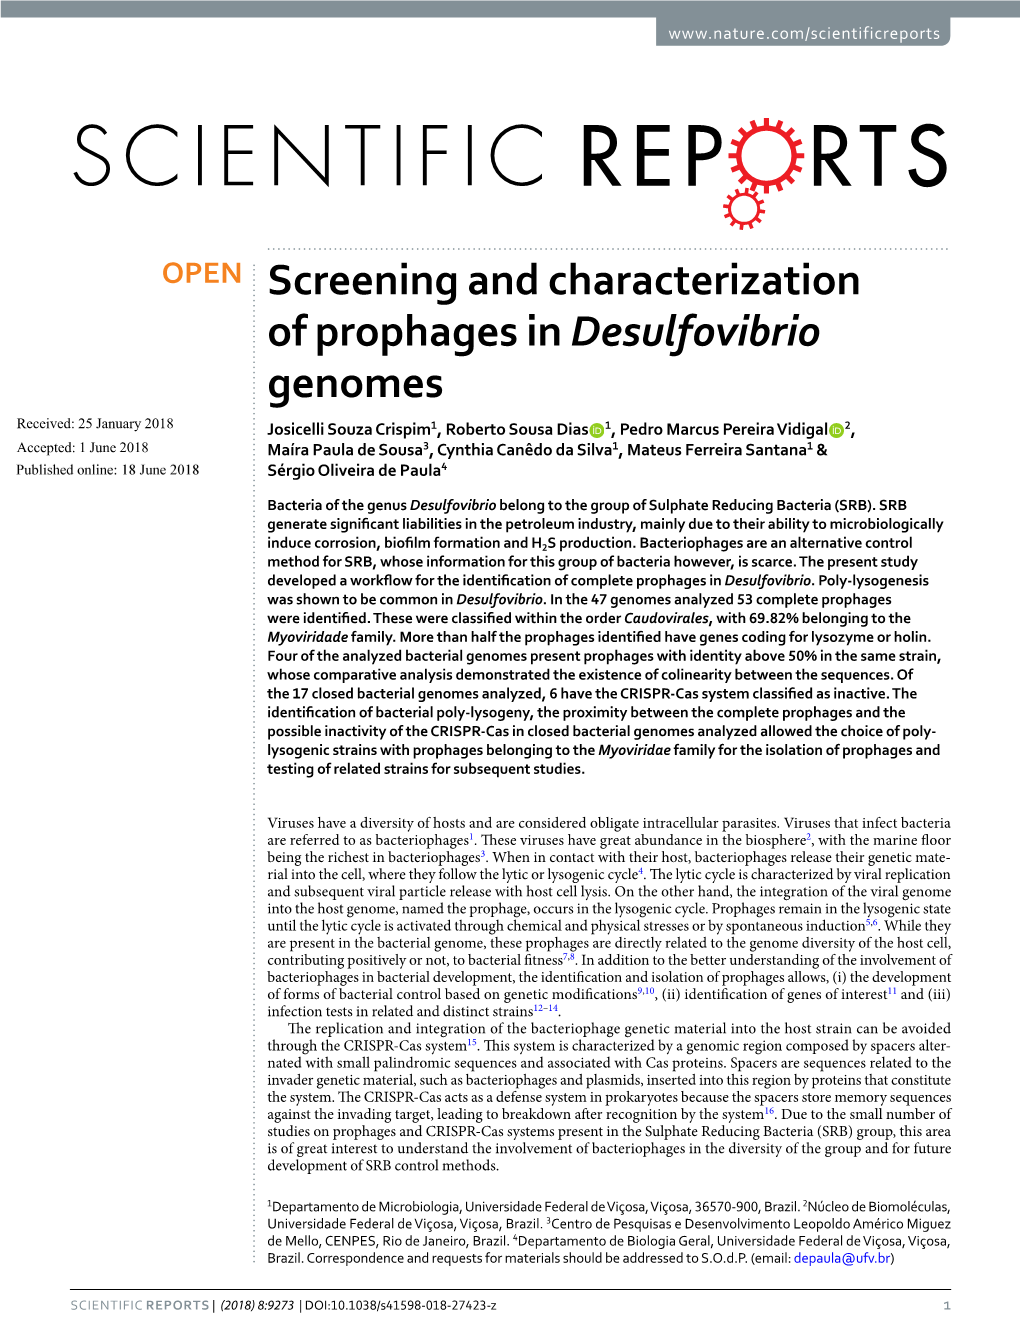 Screening and Characterization of Prophages in Desulfovibrio Genomes